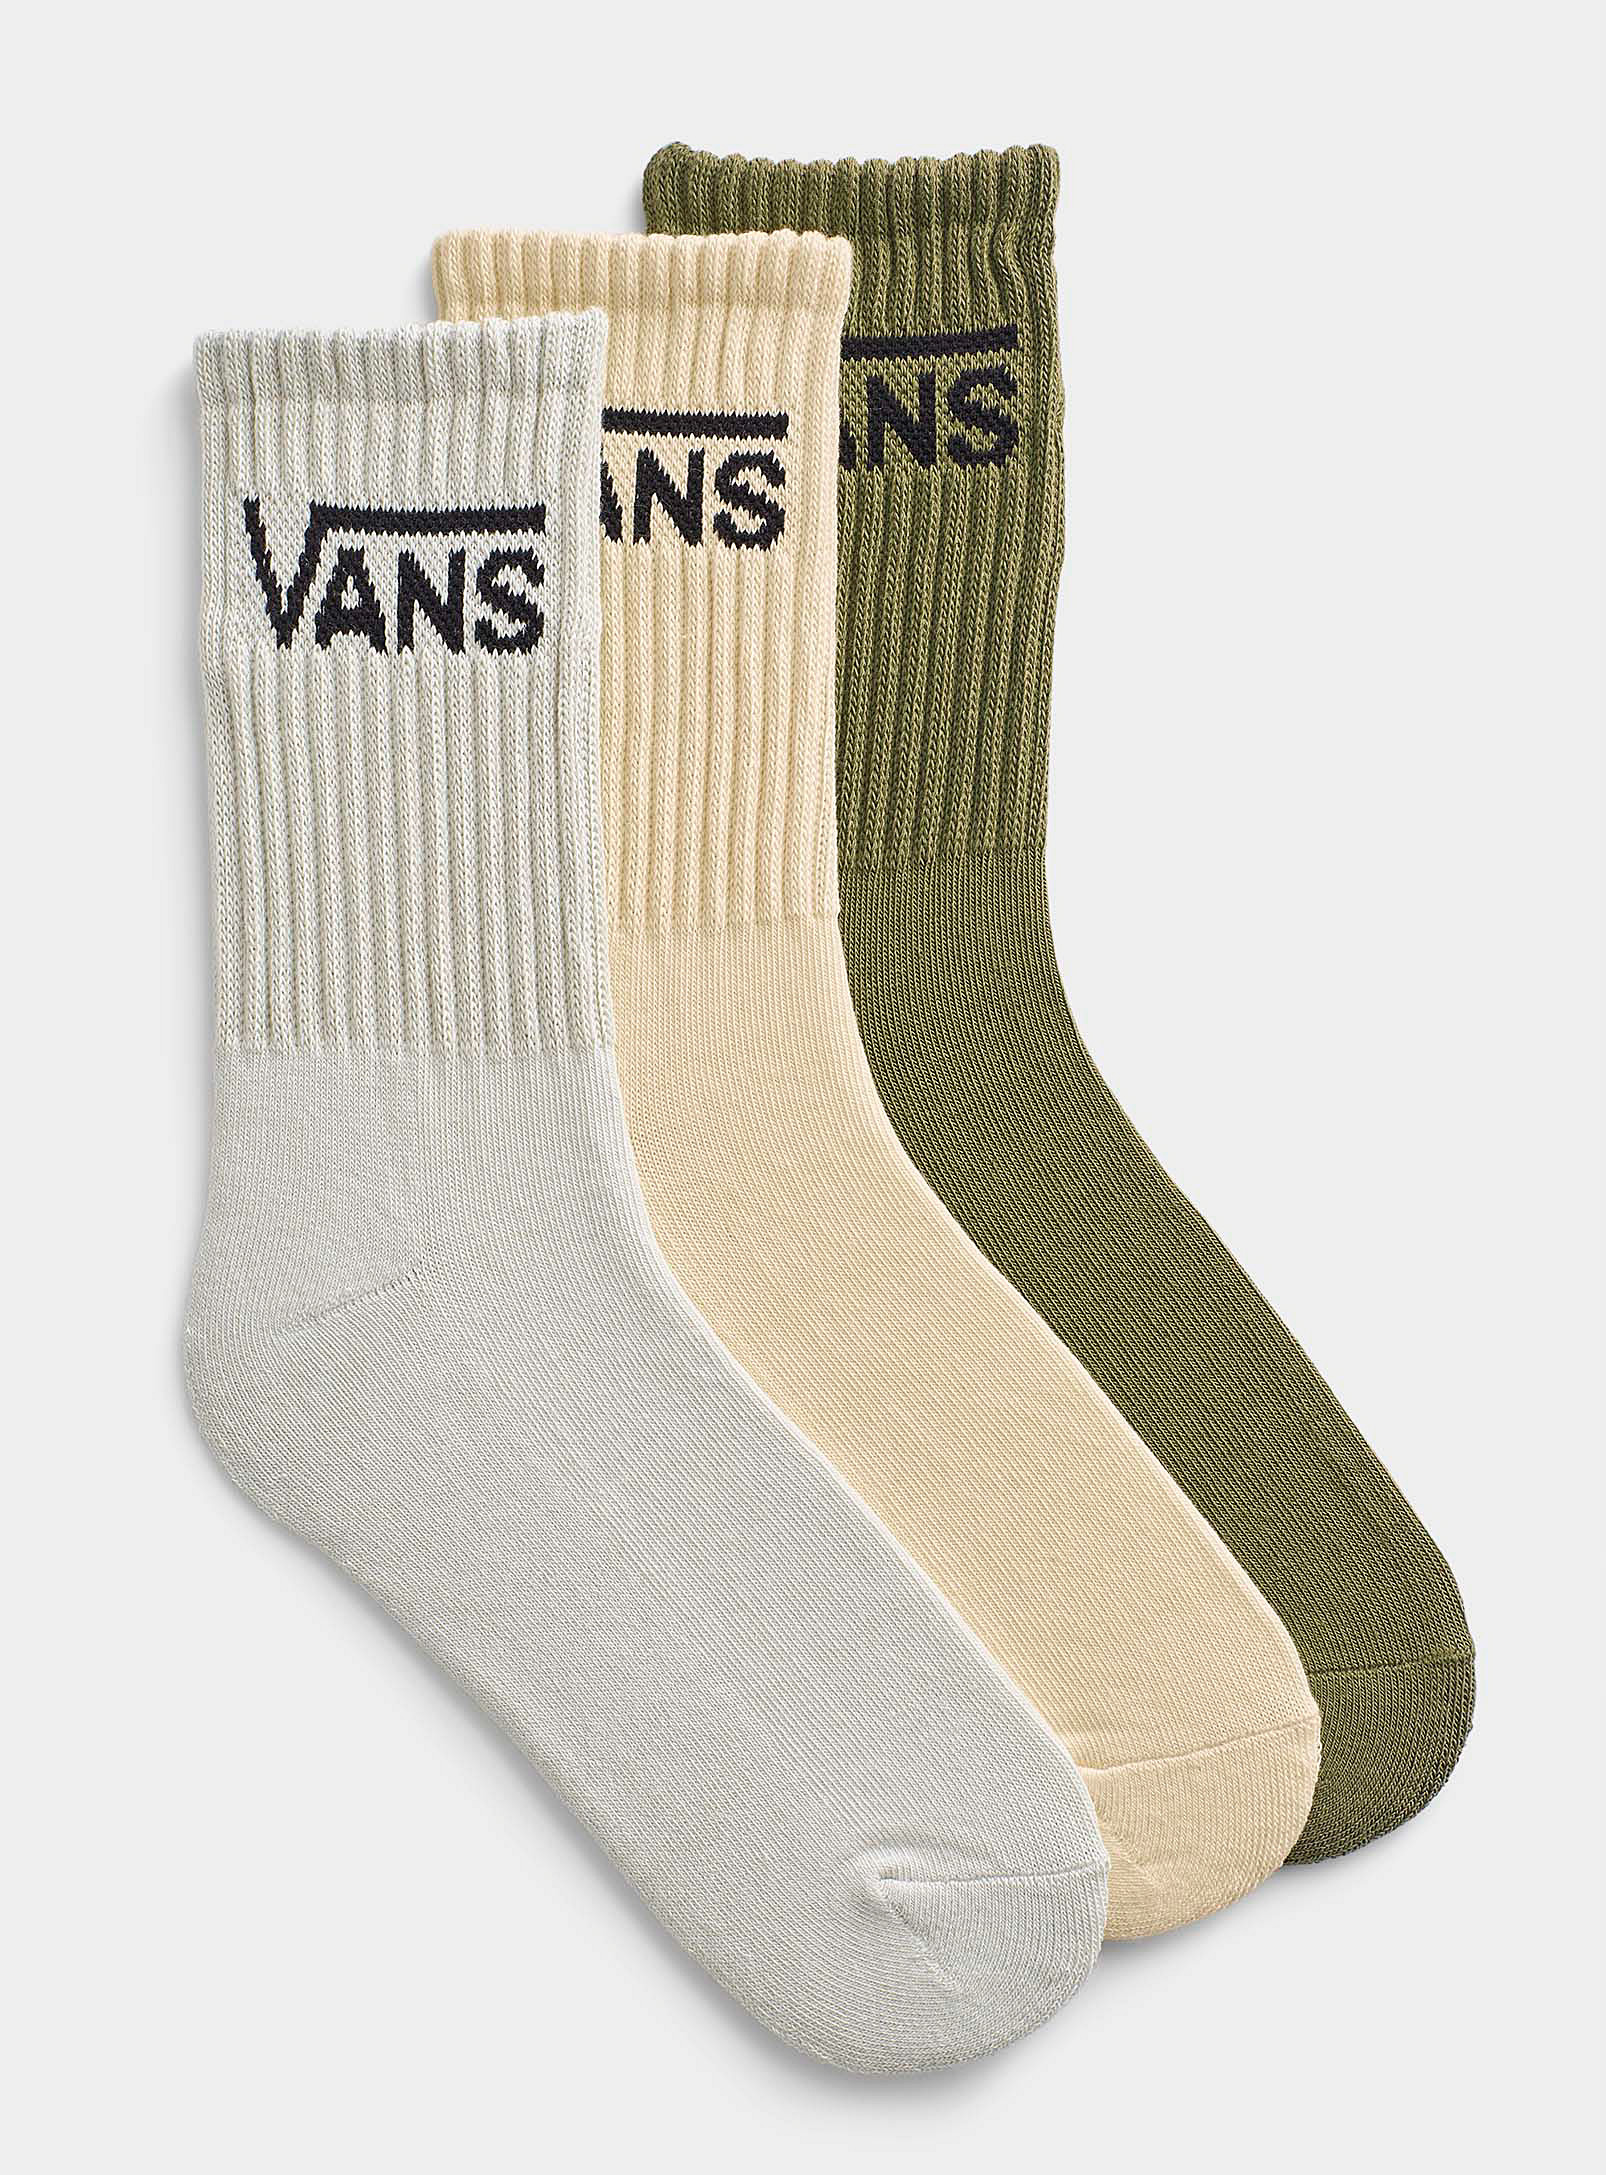 Vans Signature Ribbed Socks Set Of 3 In Lime Green